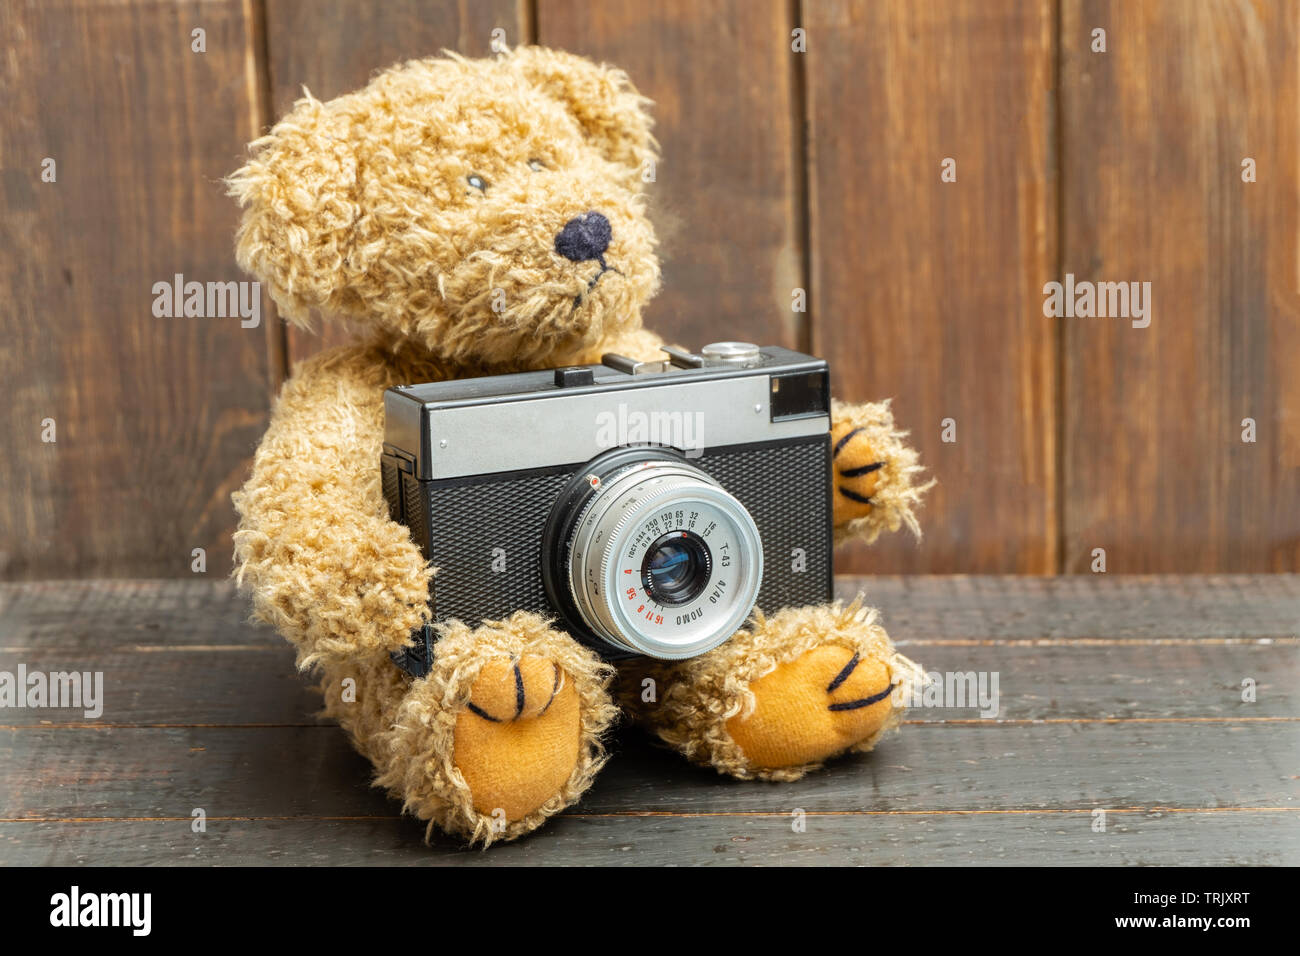 Brown teddy bear holding old vintage photo camera on wooden ...